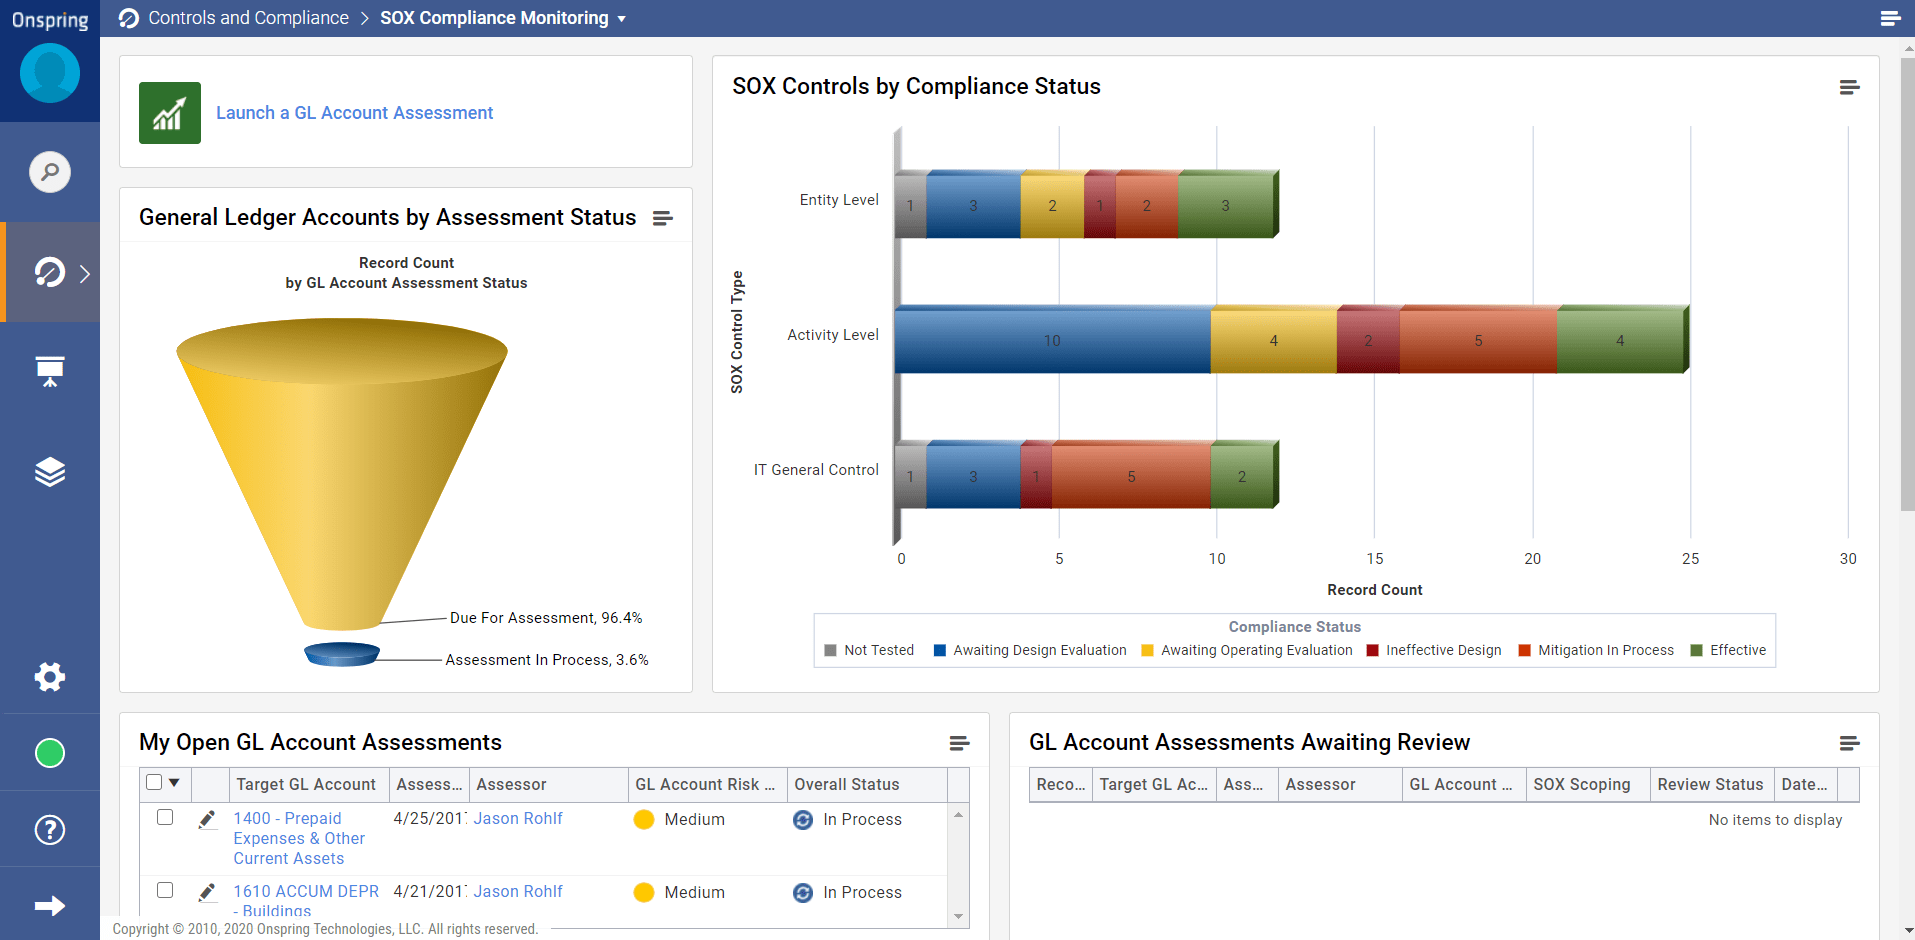 SOX Compliance Monitoring Dashboard in Onspring